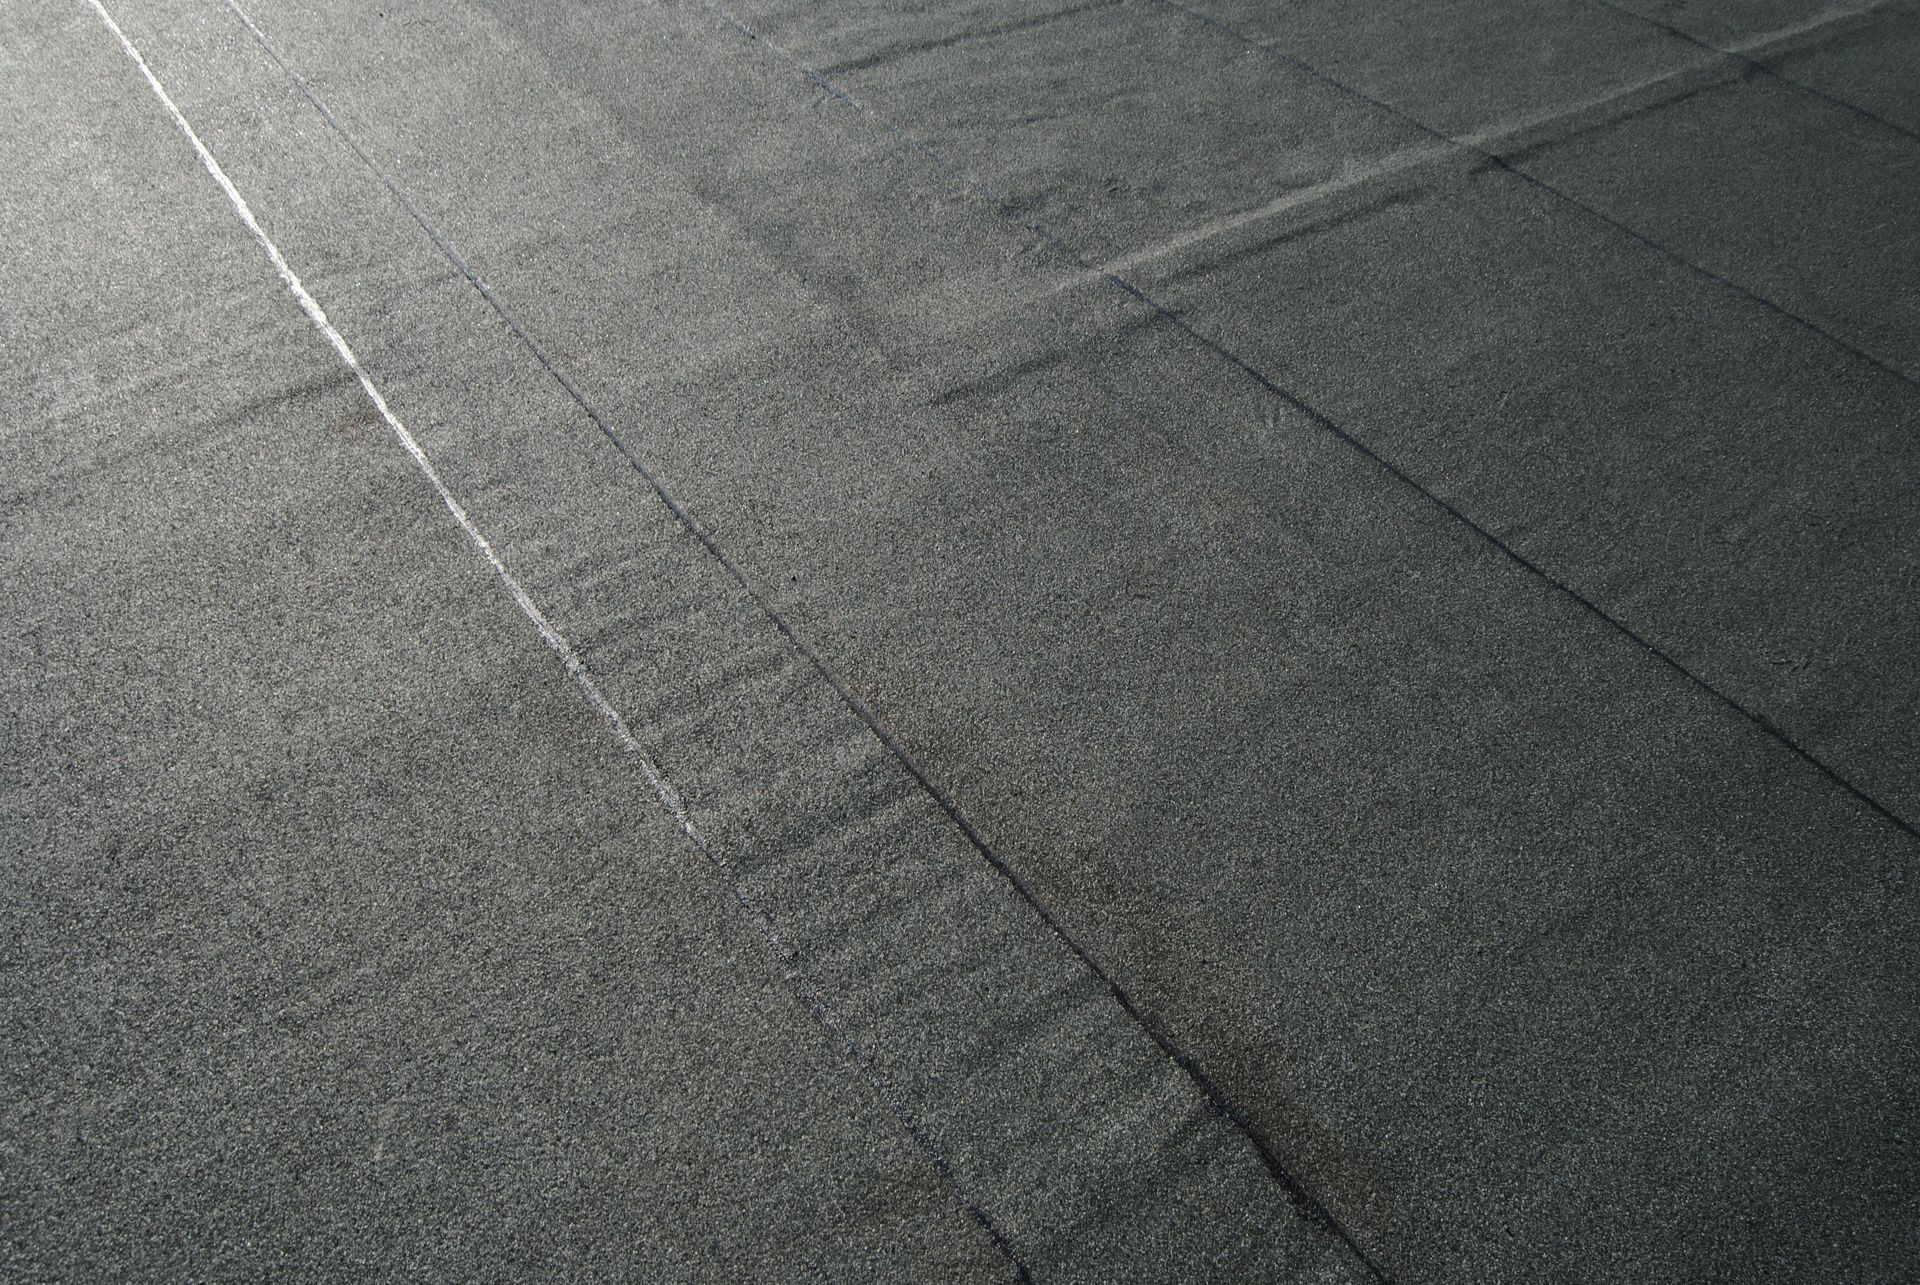 A close-up view of a waterproofing membrane installed on a  flat roof.